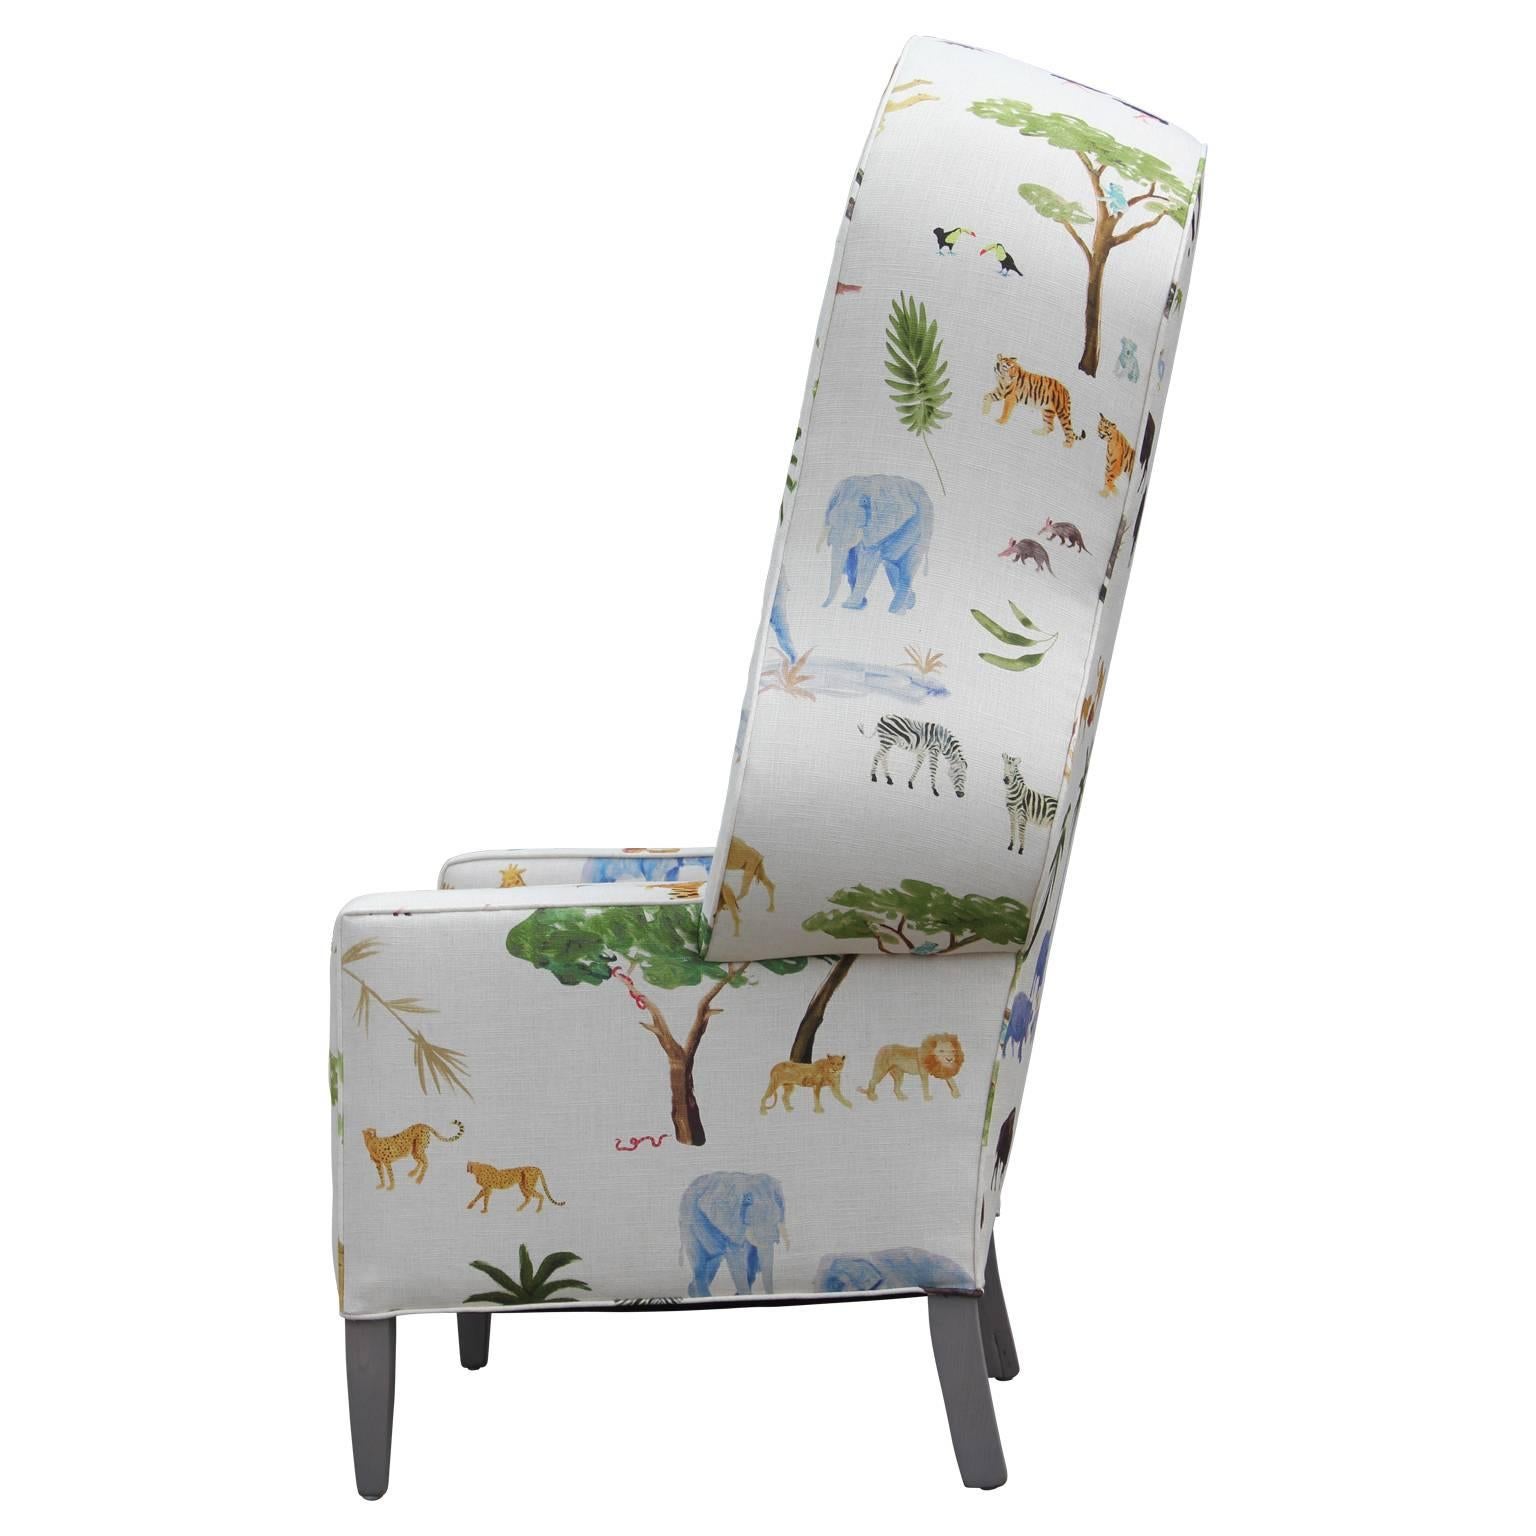 Mid-20th Century Modern Porter's Chair in the Style of Baker Furniture in Safari Animal Print